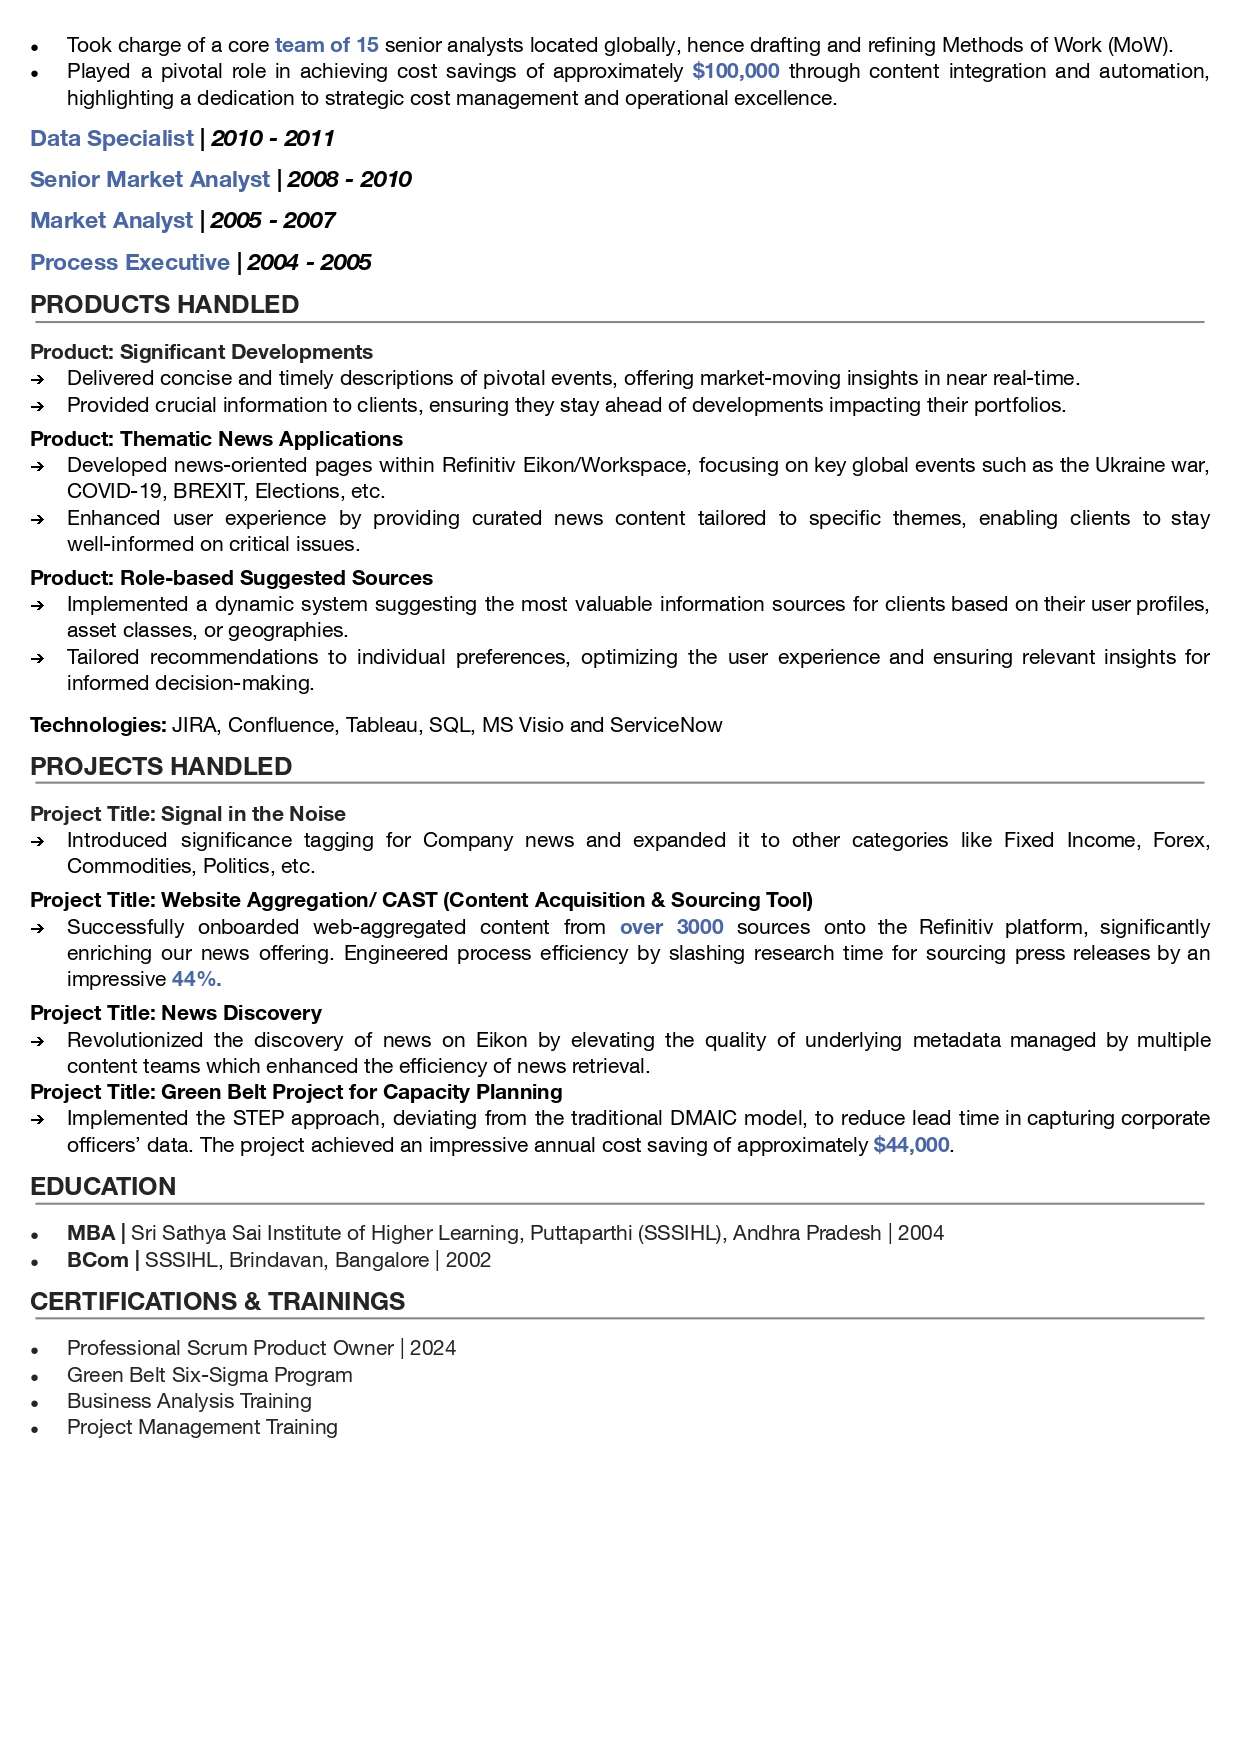 Senior Product Manager Resume Sample_page-0002